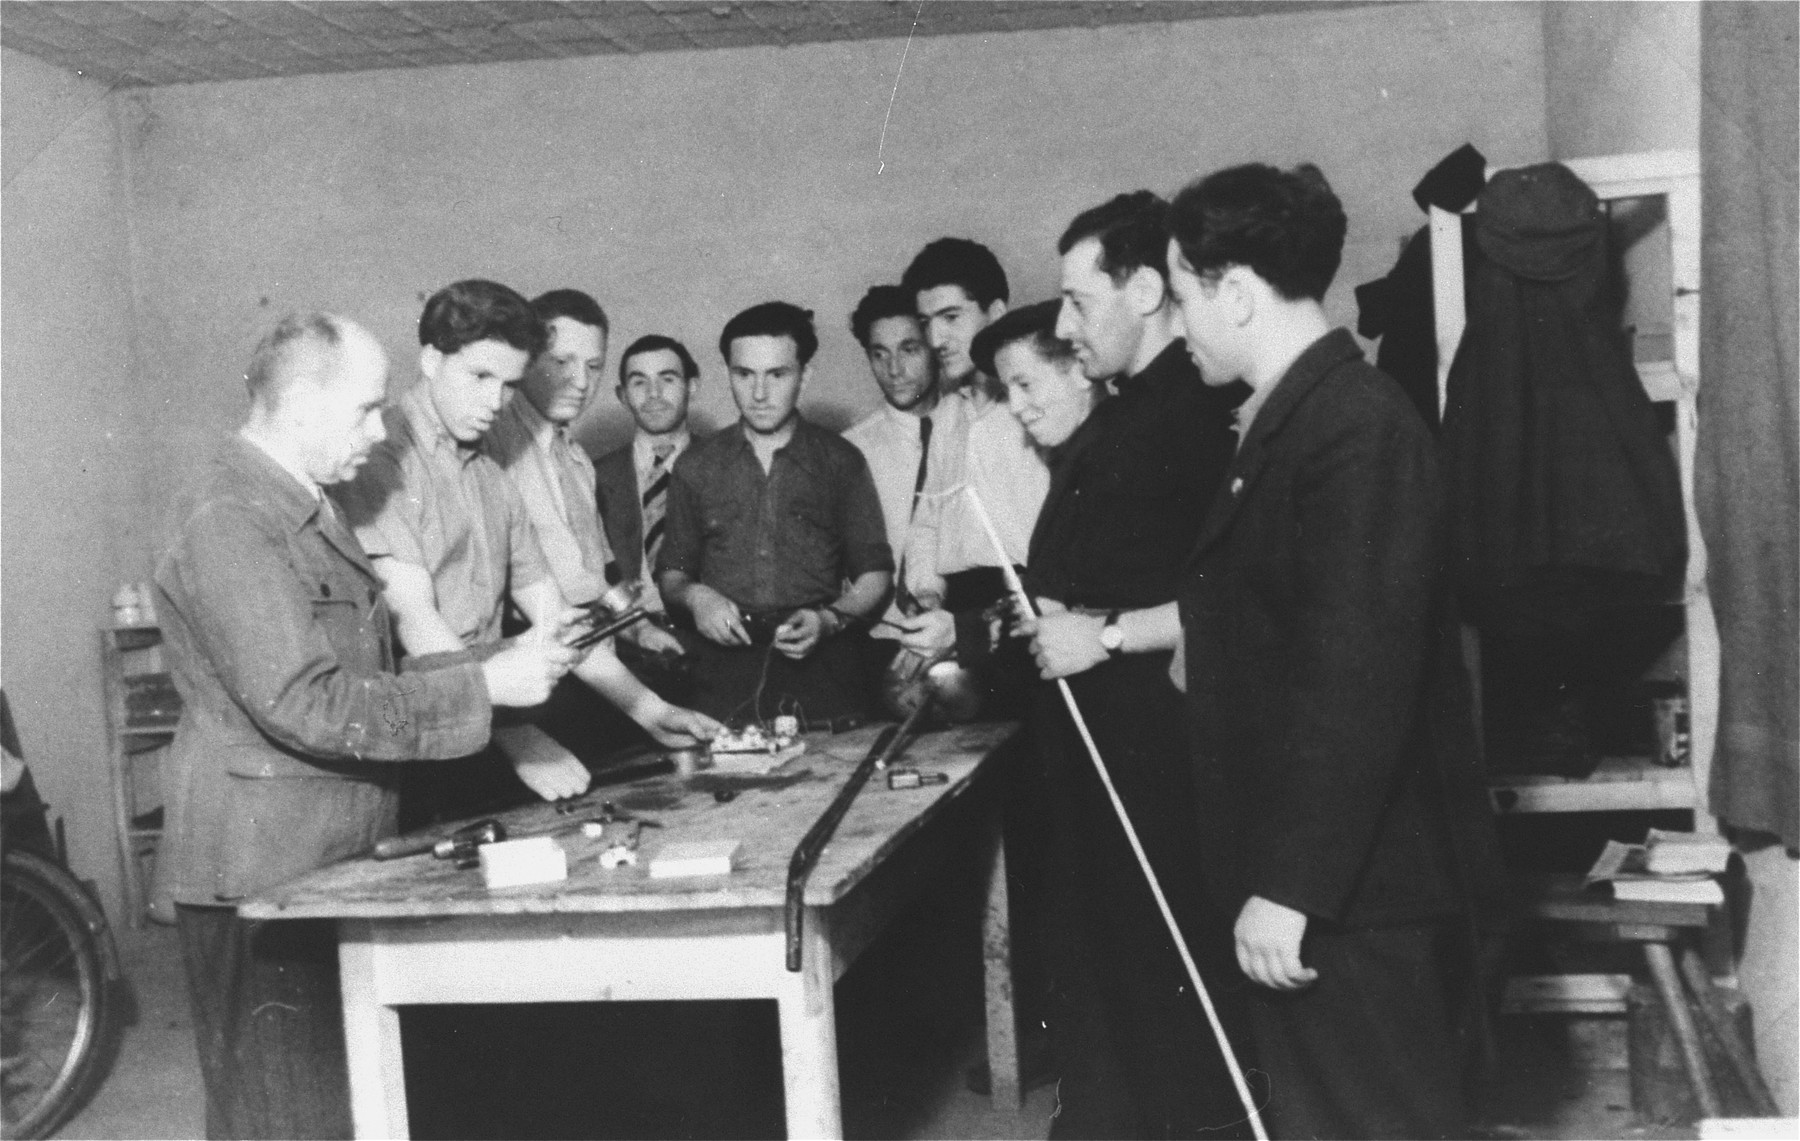 Men gather around a table for a tools demonstration in an ORT sponsored vocational school in the Zeilsheim displaced persons' camp.

Pictured among the men in the background is Jana Wisgardisky.